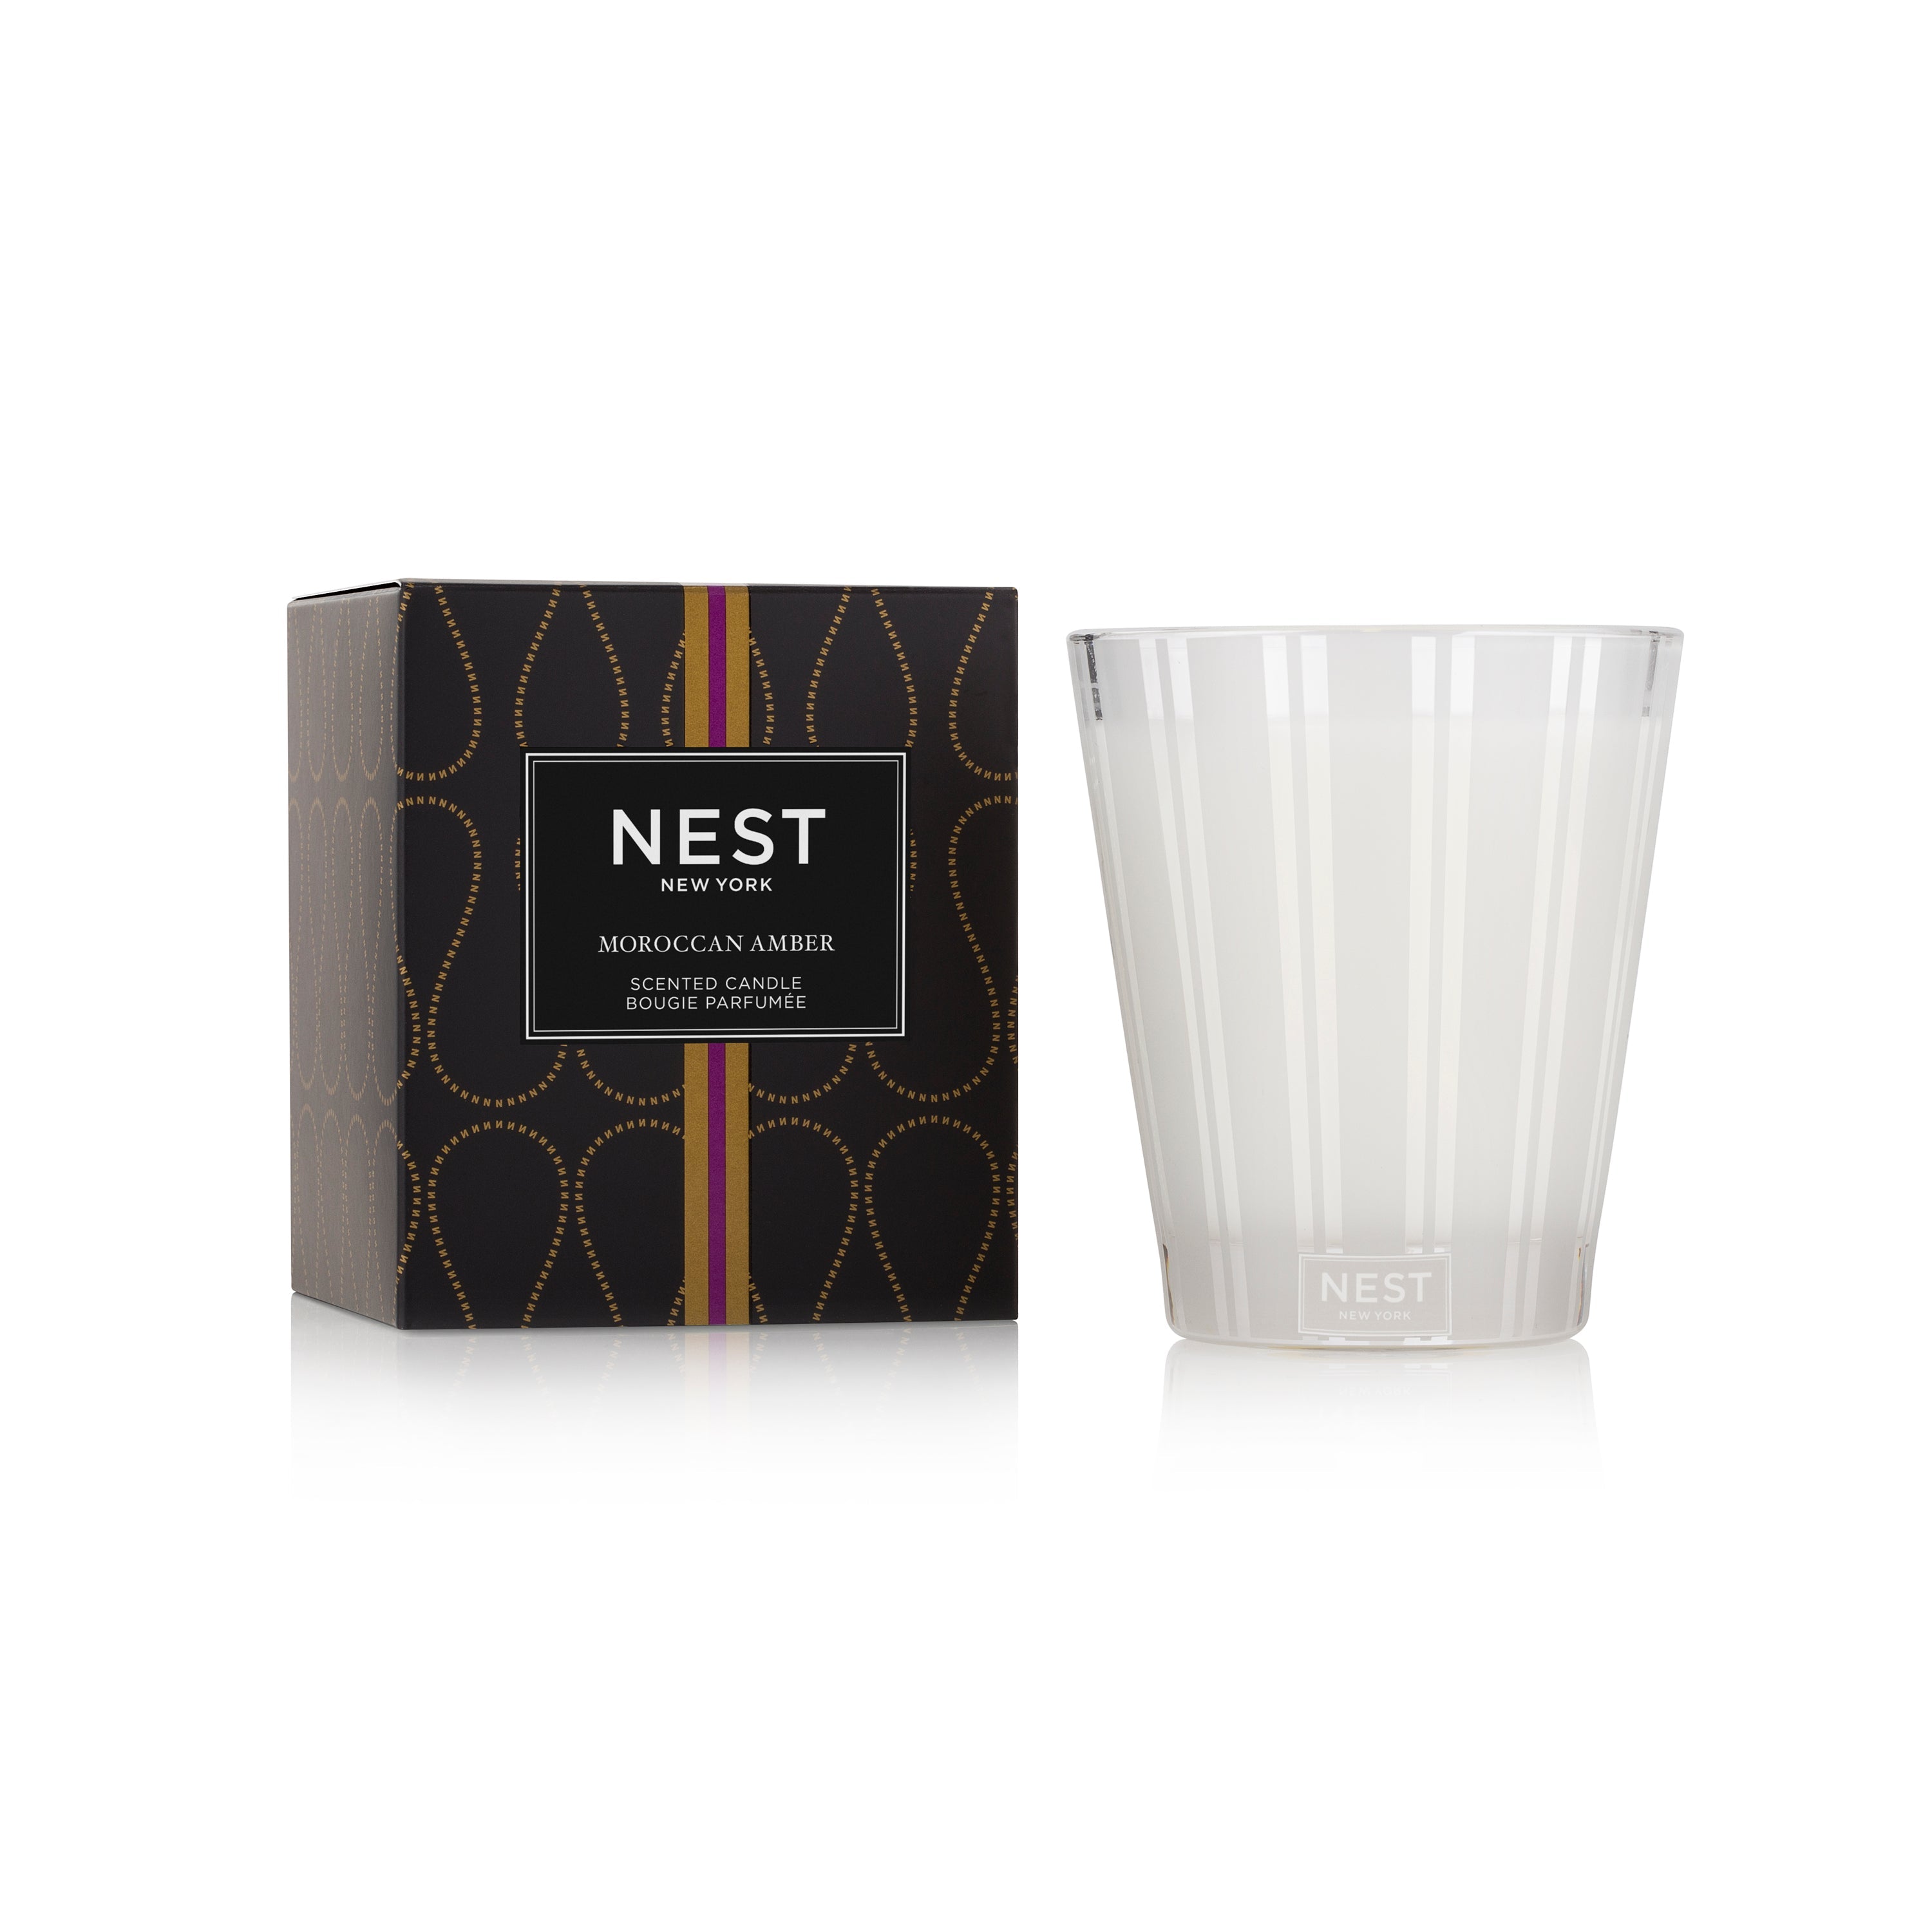 Moroccan Amber 8oz. Candle by Nest New York